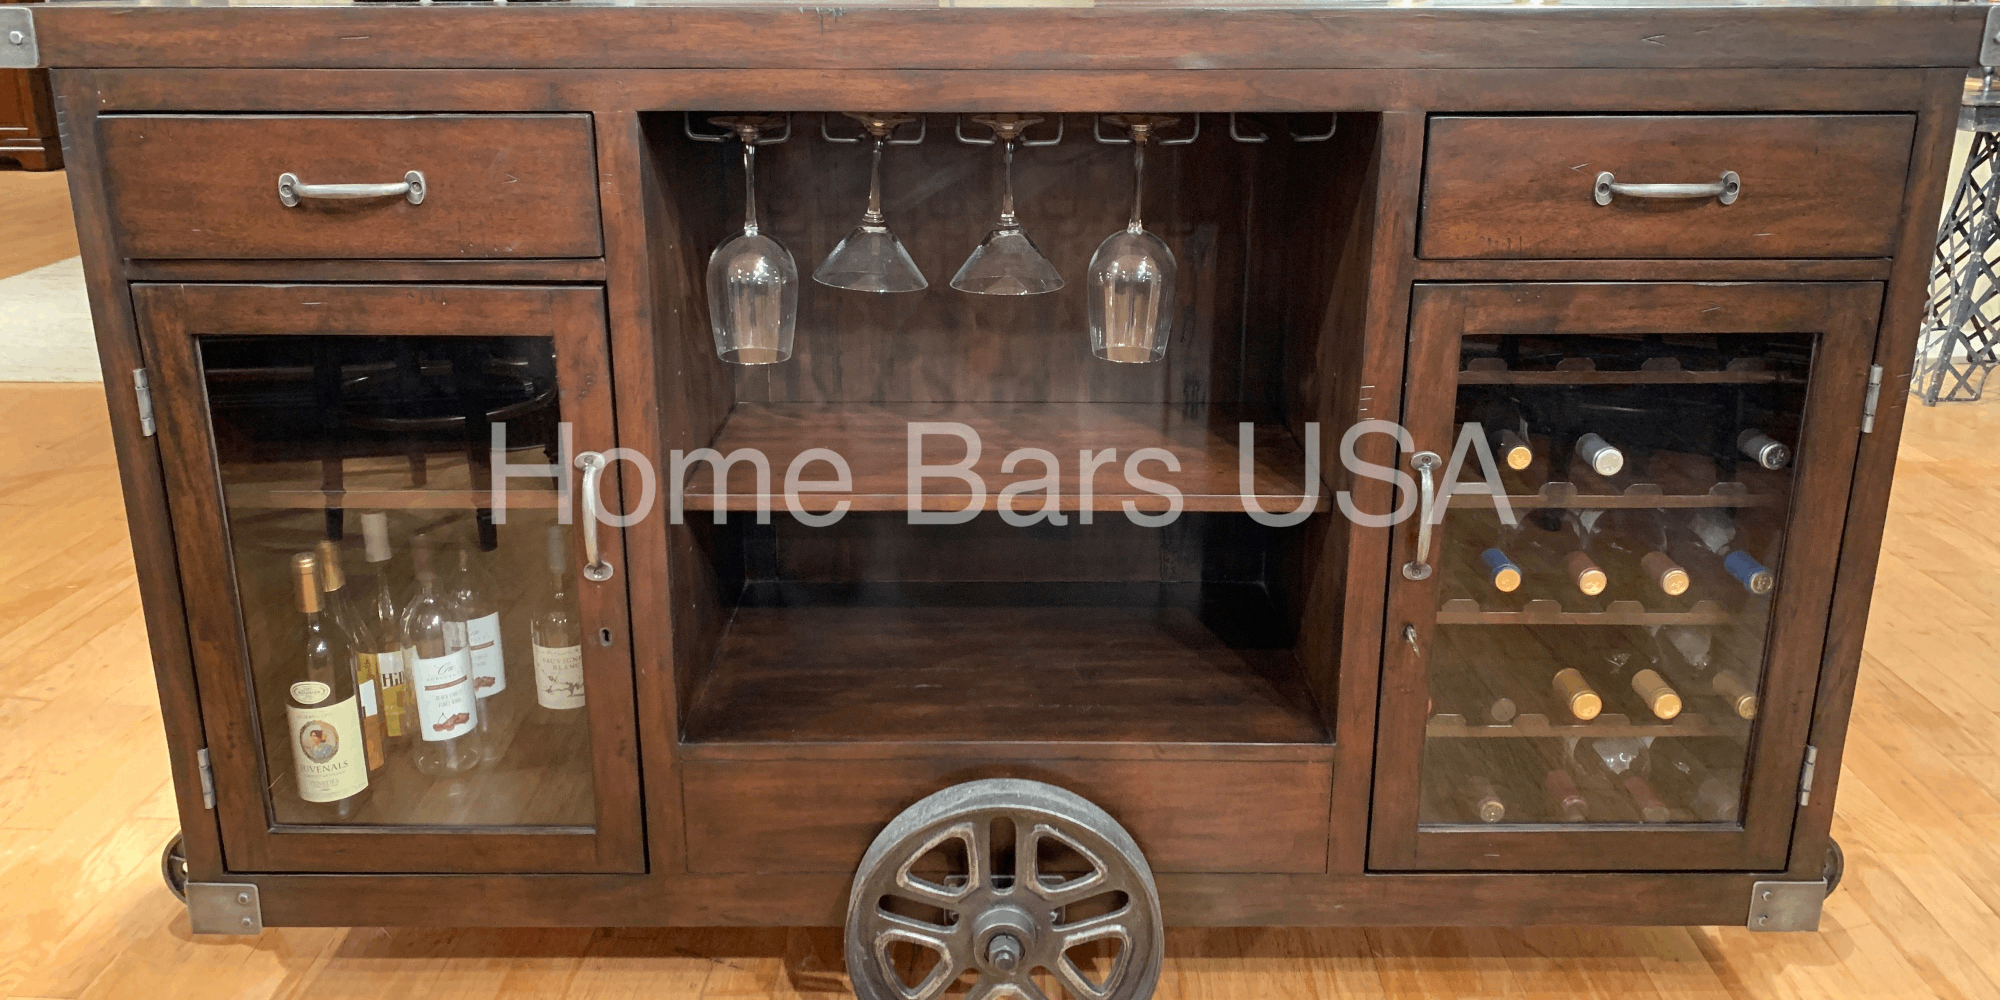 Enhance Your Home Entertainment with a Trolley Bar